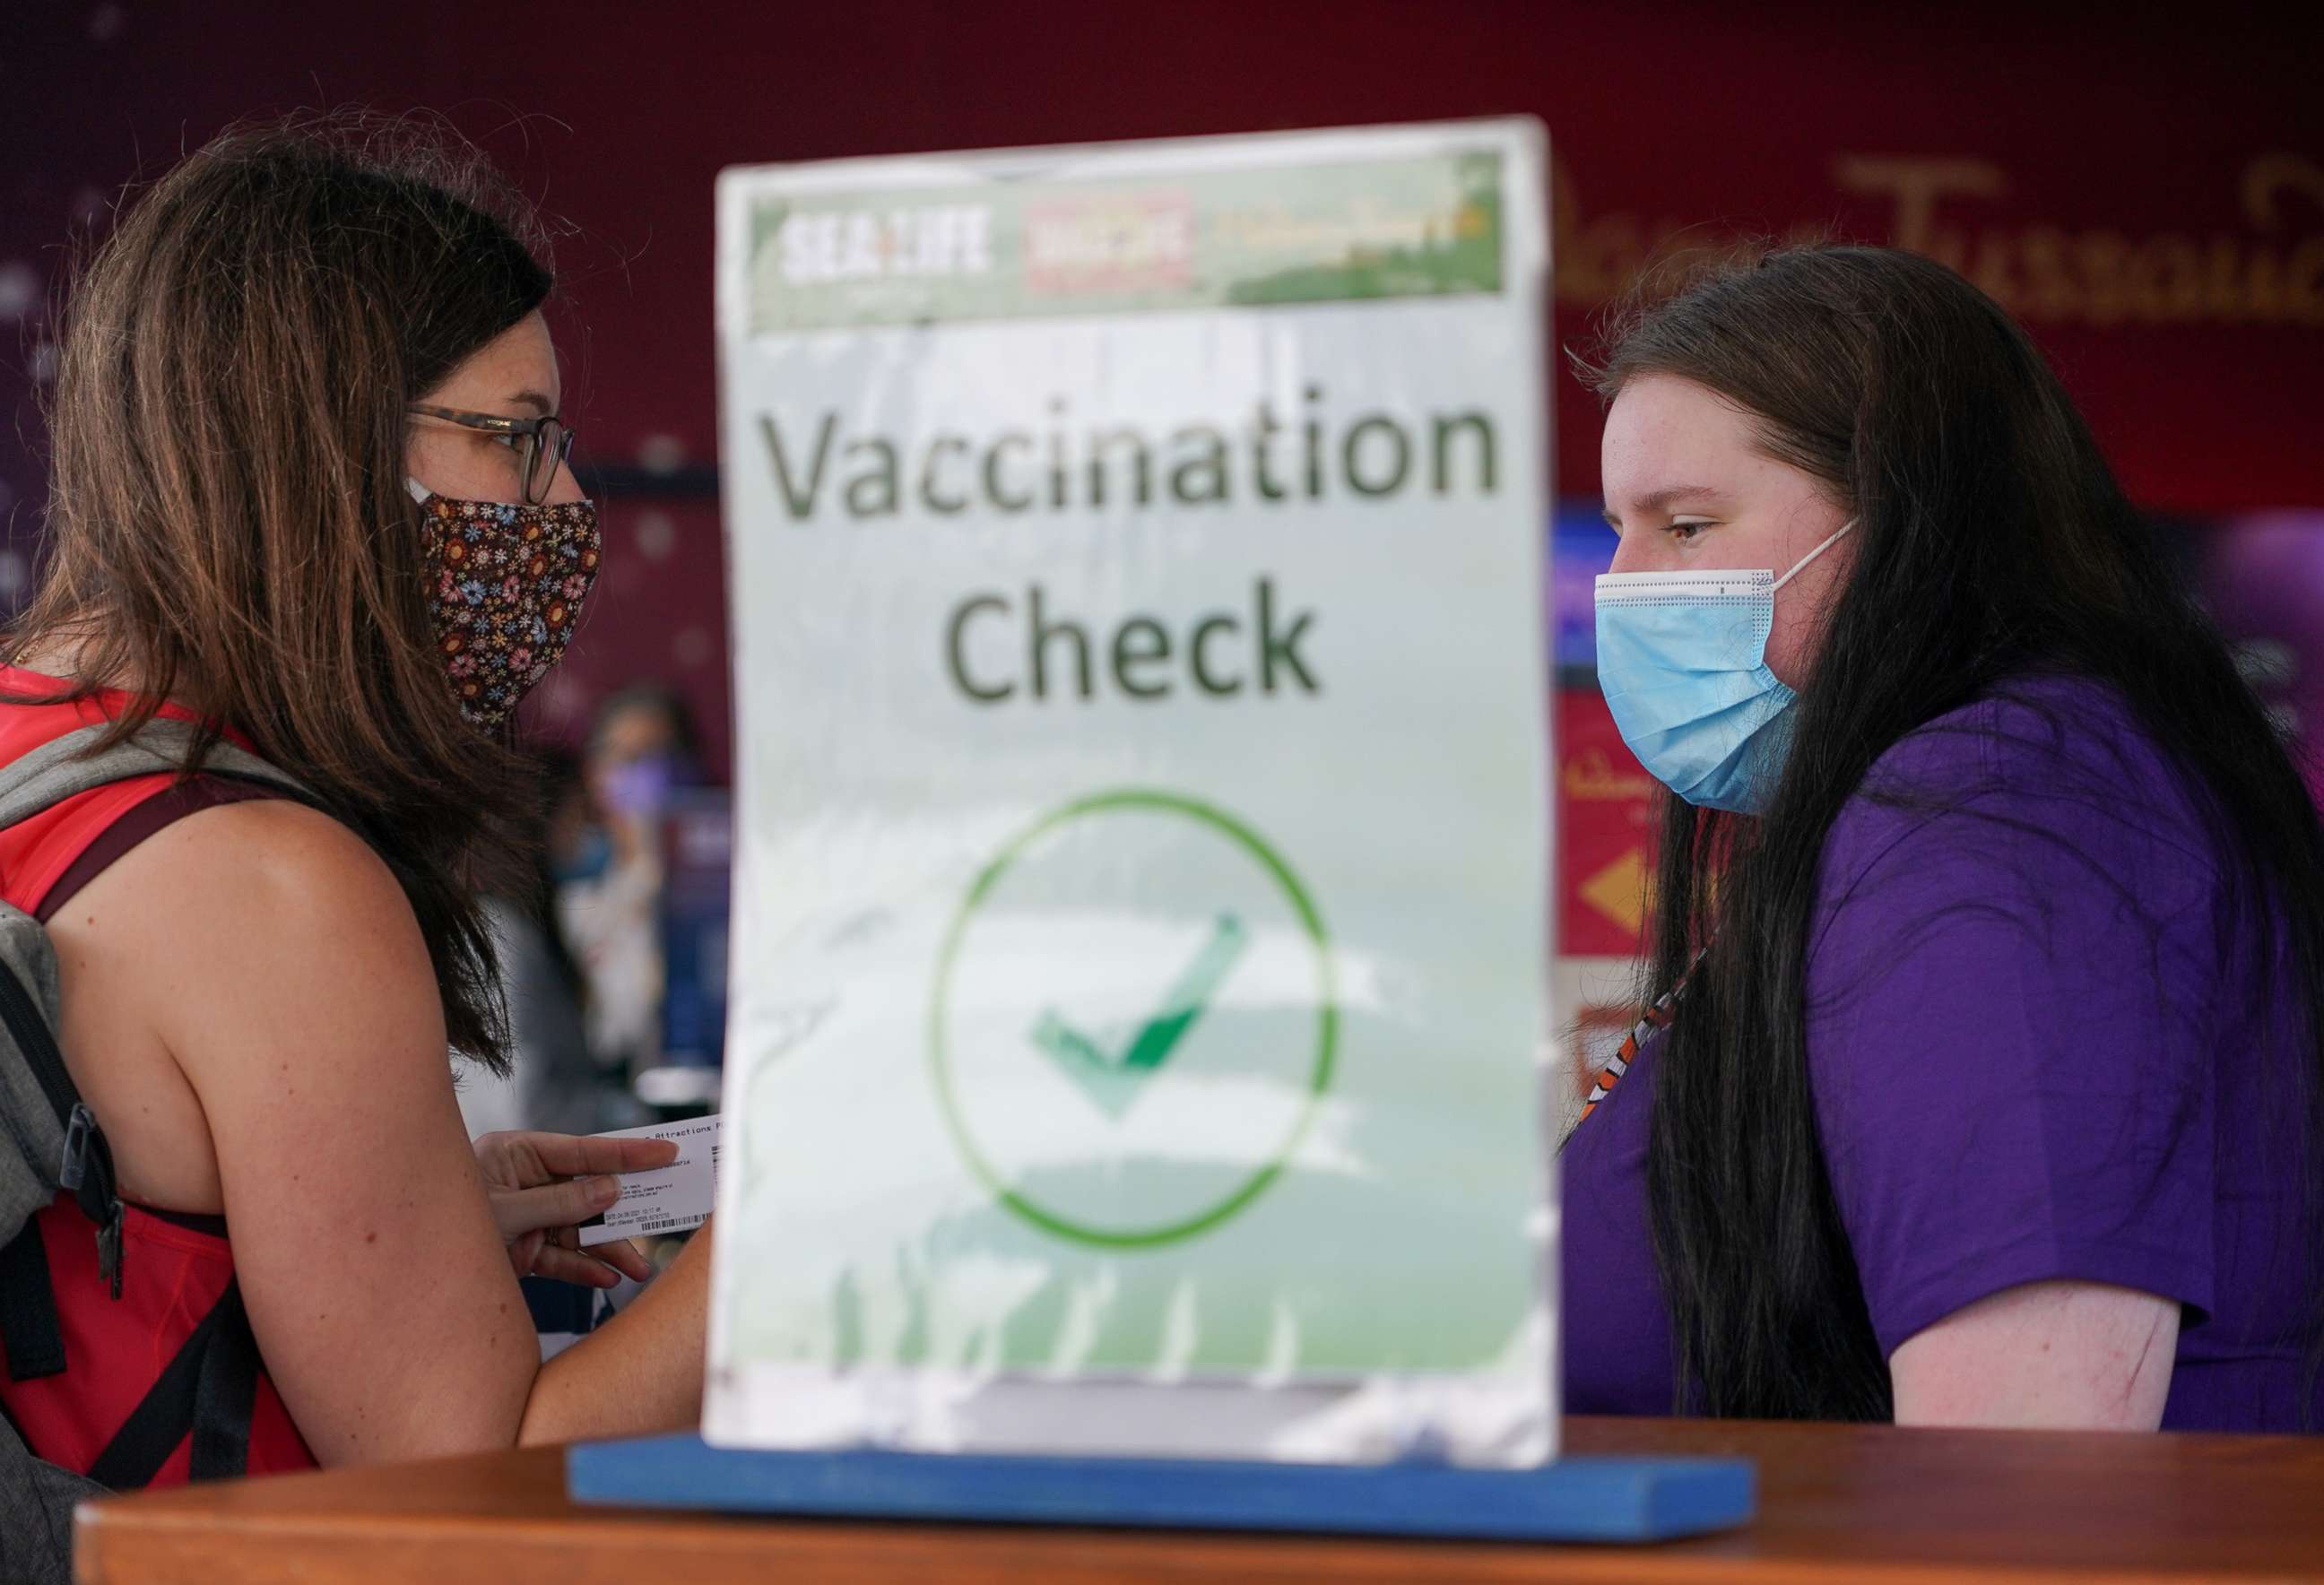 PHOTO: A staff member attends to a visitor at a vaccination check station at SEA LIFE Sydney following an extended closure due to coronavirus disease (COVID-19) lockdown orders, in Sydney, Australia, October 14, 2021. 